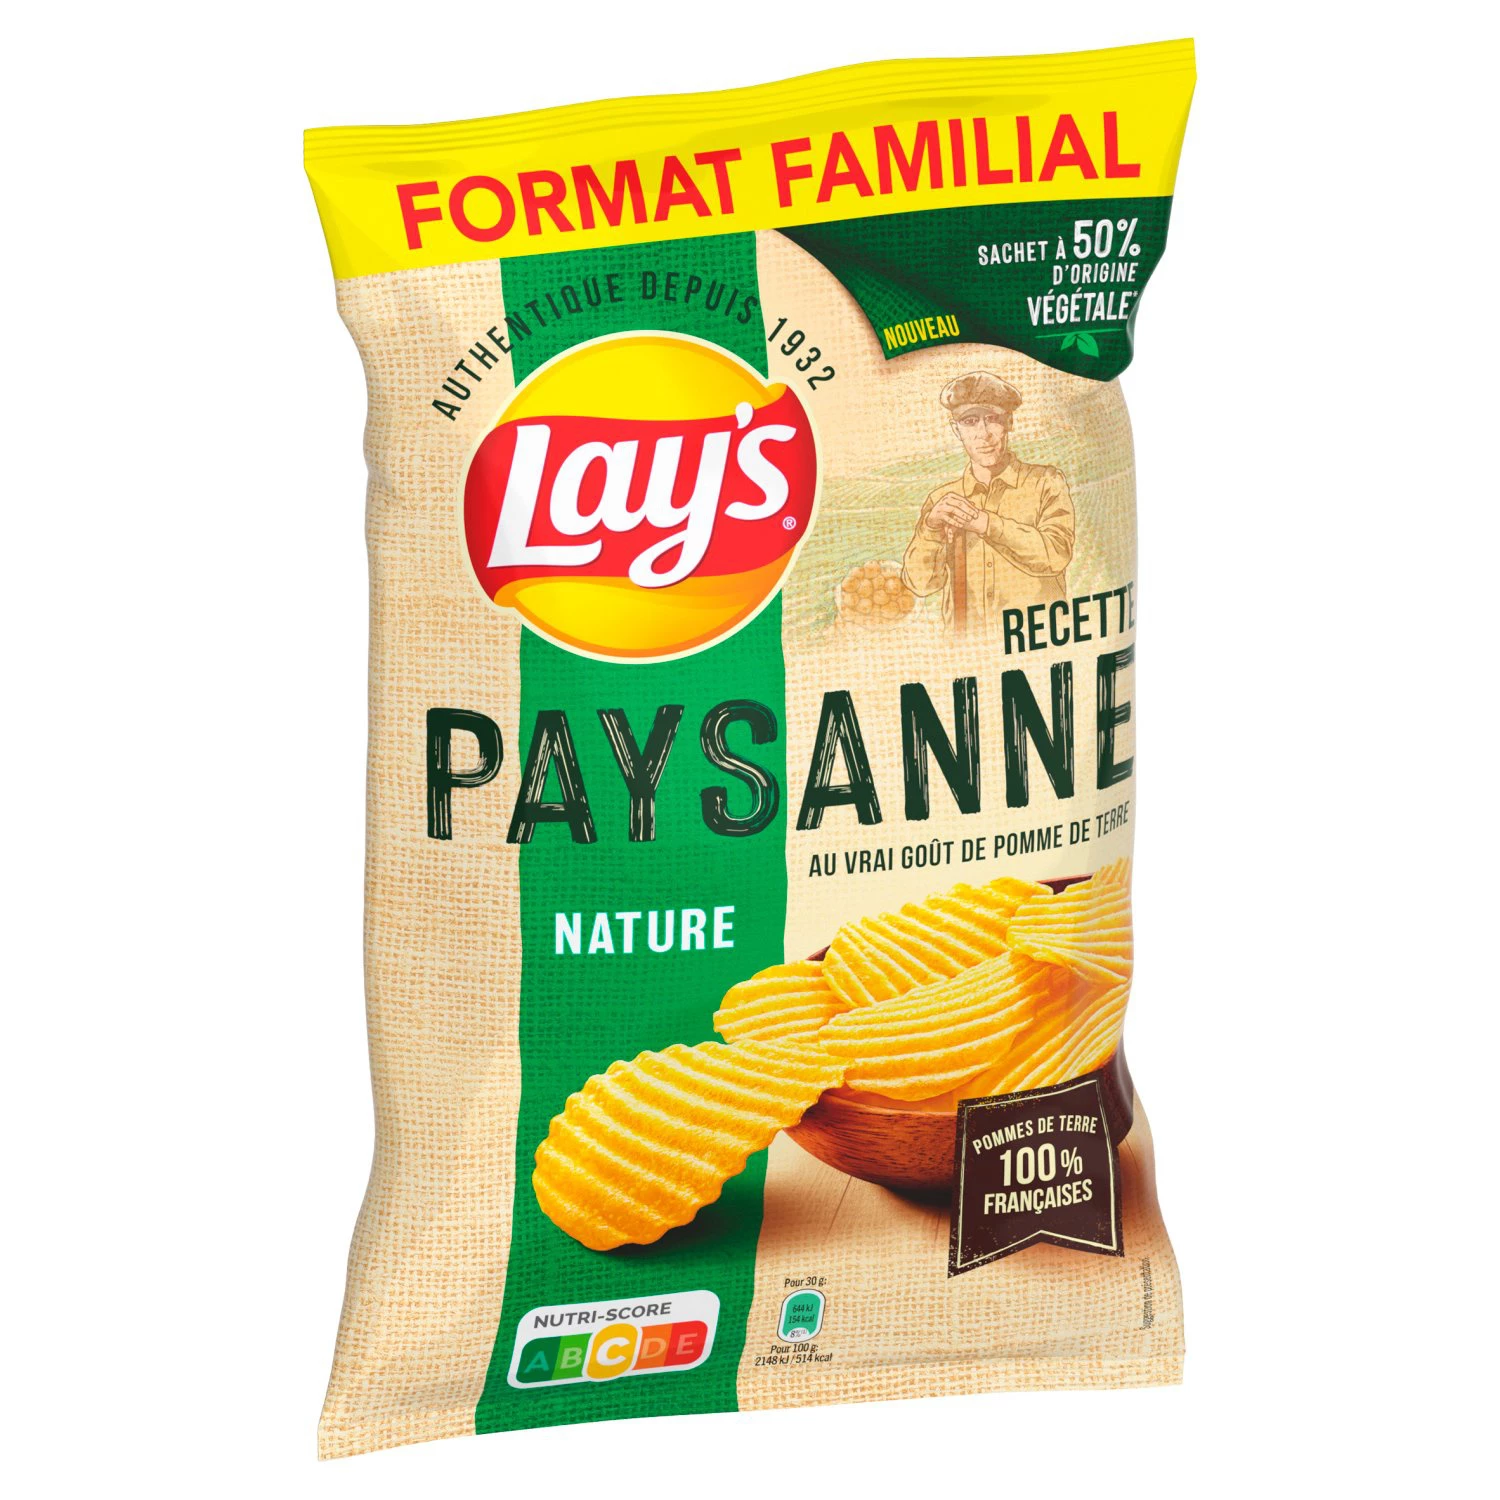 Chips Recette Paysanne Nature, 295g - LAY'S